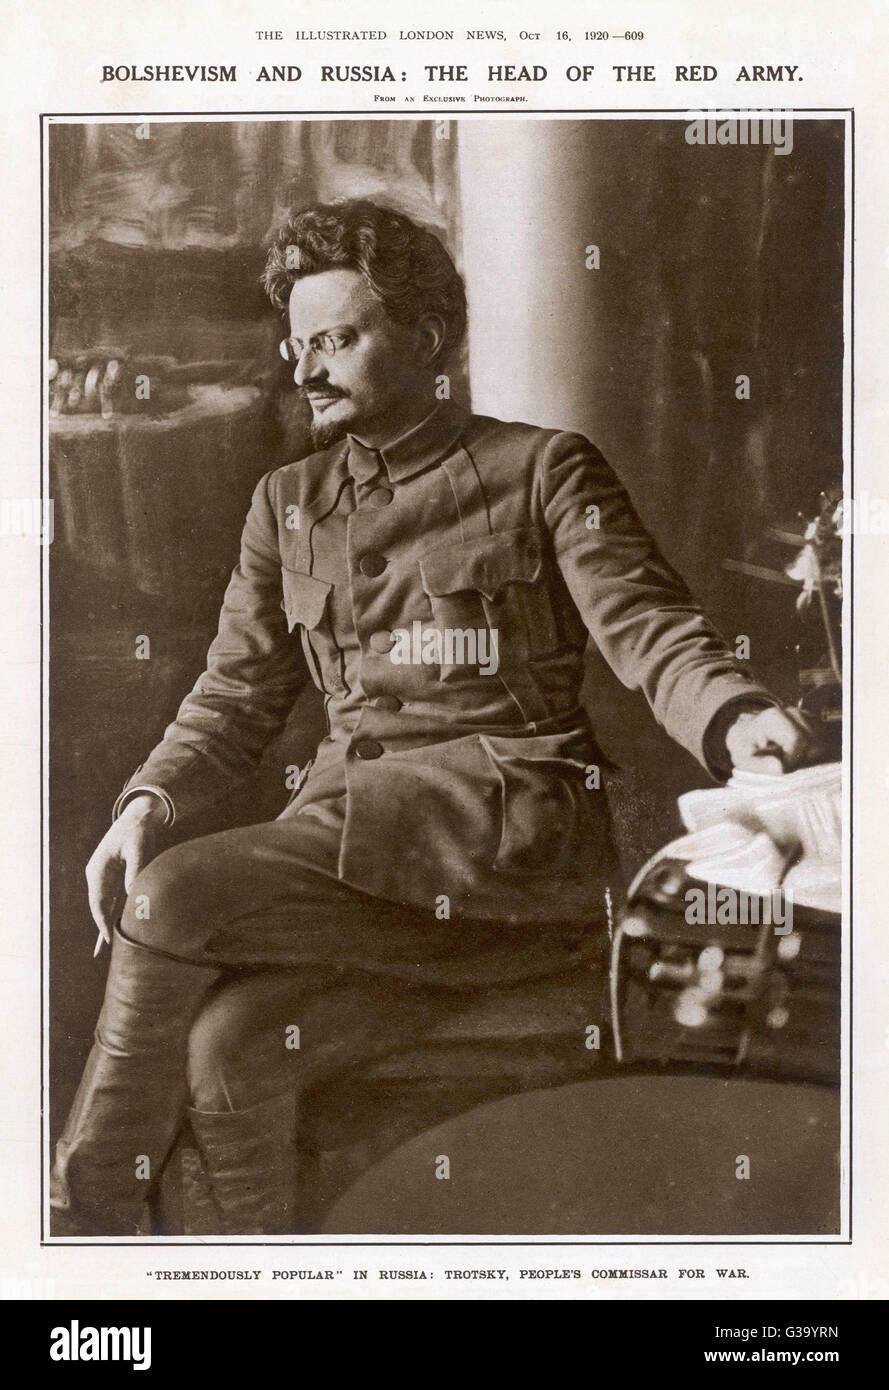 LEON TROTSKY or LEV DAVIDOVICH BRONSTEIN  Russian Communist leader in  1920, at the height of his  popularity as the People's  Commissar for War     Date: 1879 - 1940 Stock Photo